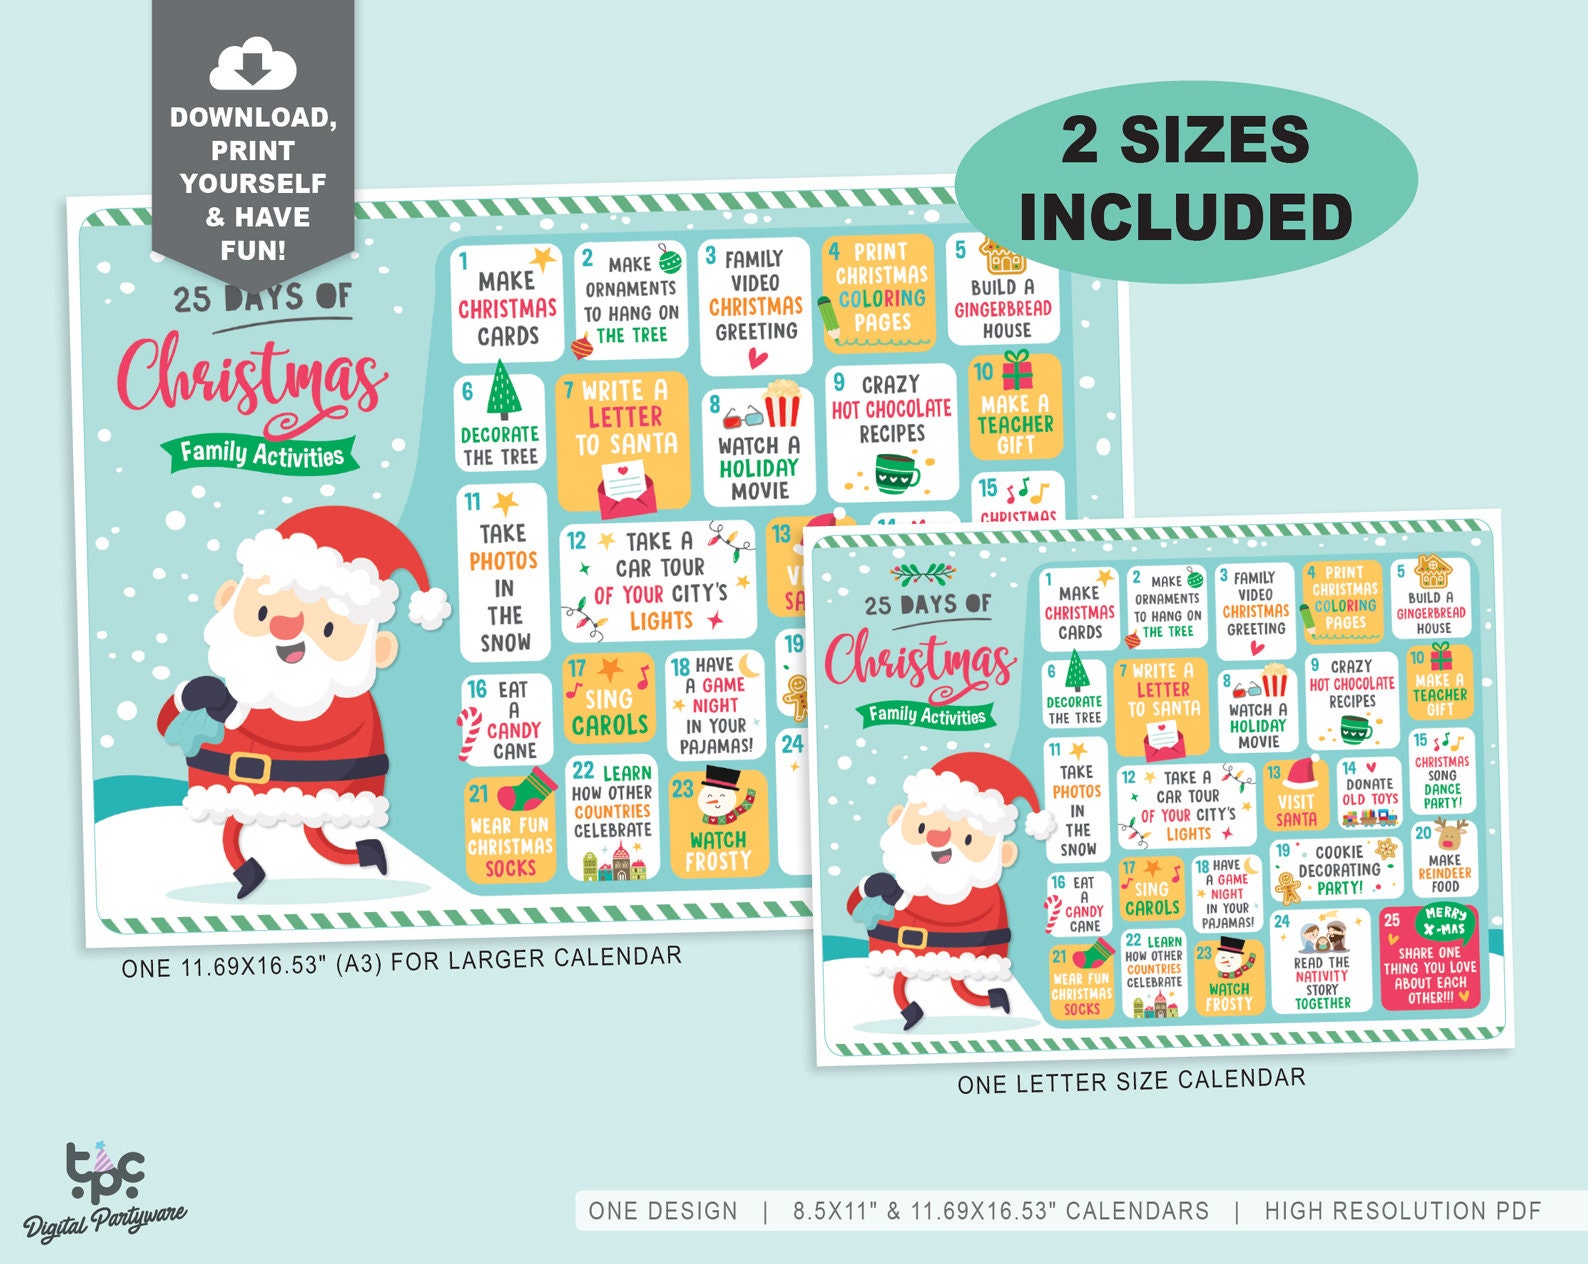 Free Christmas Planner Stickers - 25 Different Funny & Cute Designs